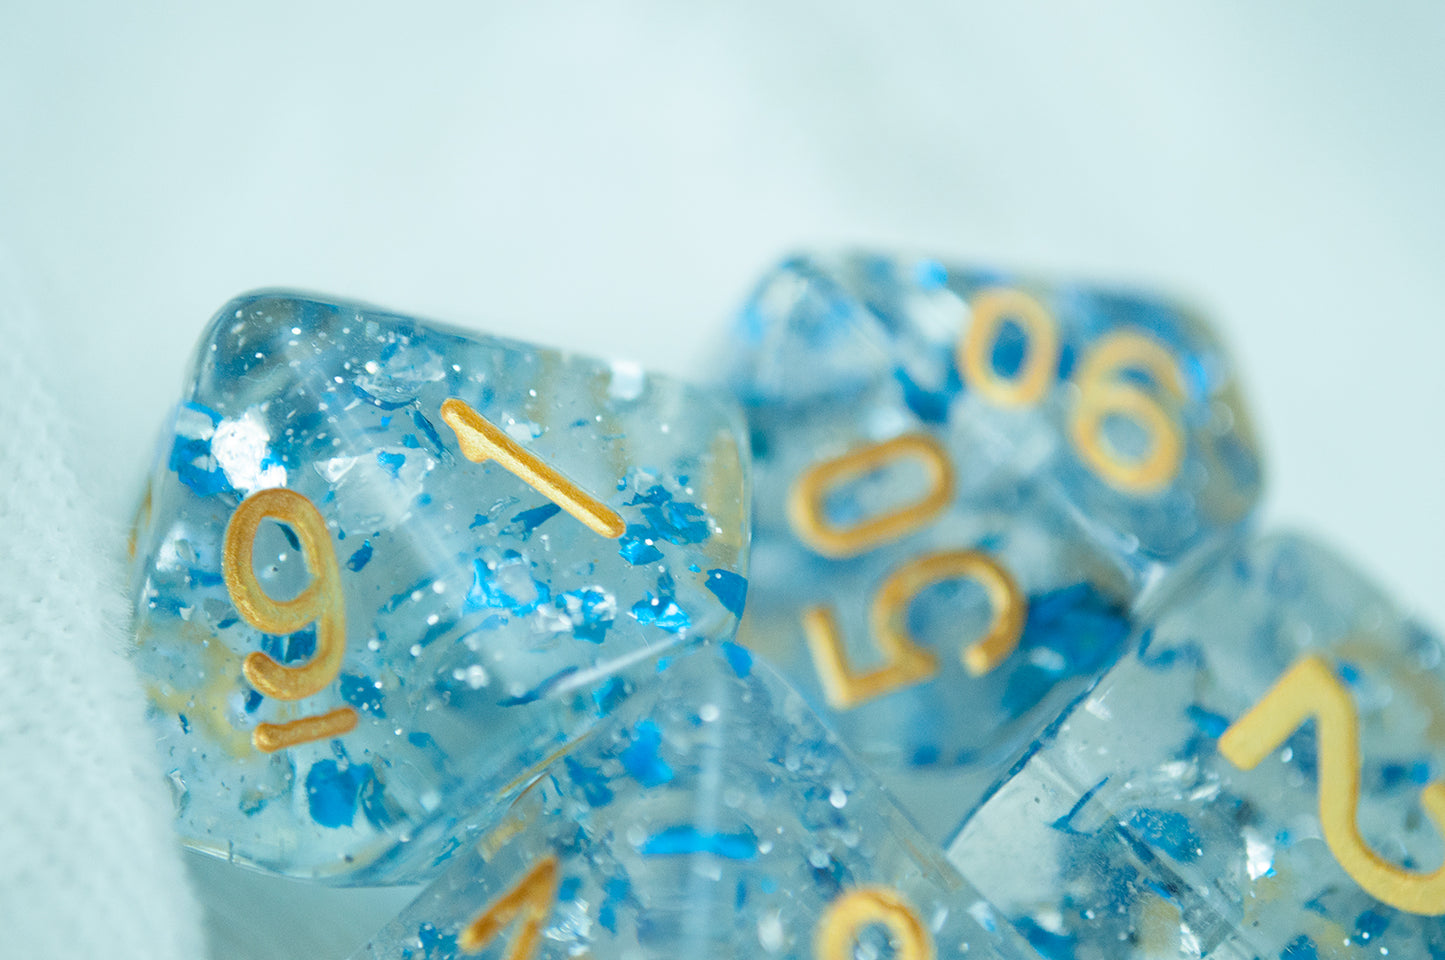 A close up of the Metallic Sapphire 7 piece dice set from Tabletop Loot with blue metallic flakes suspended in clear resin with glitter and gold numbering.